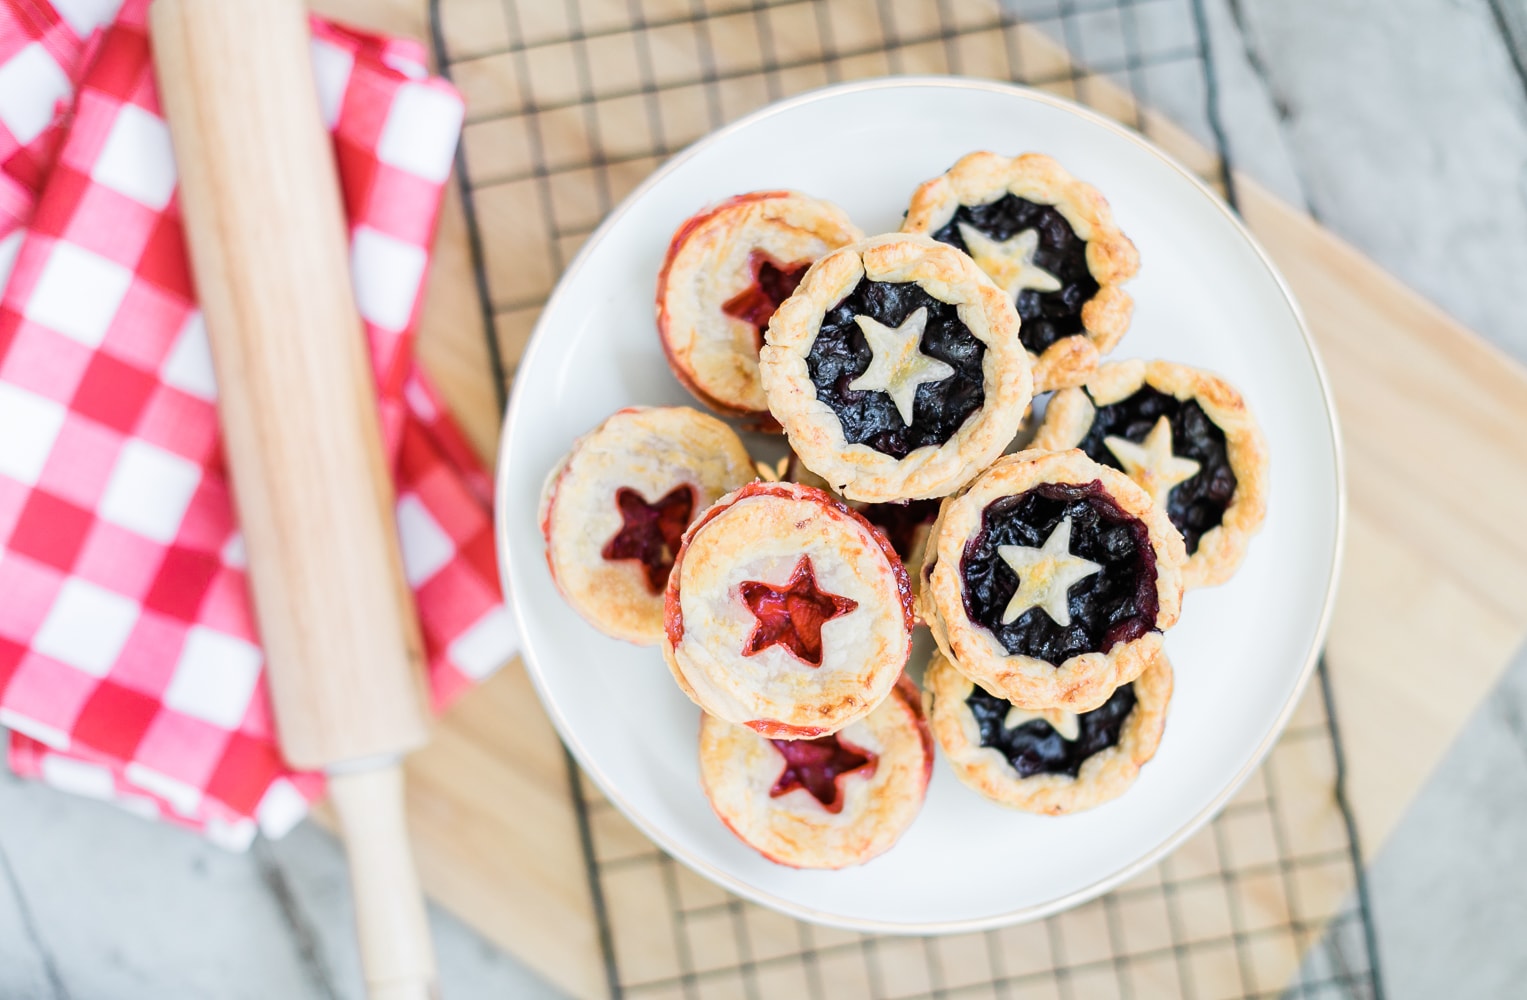 Blogger Stephanie Ziajka shows how to make mini pies for the 4th of July on Diary of a Debutante